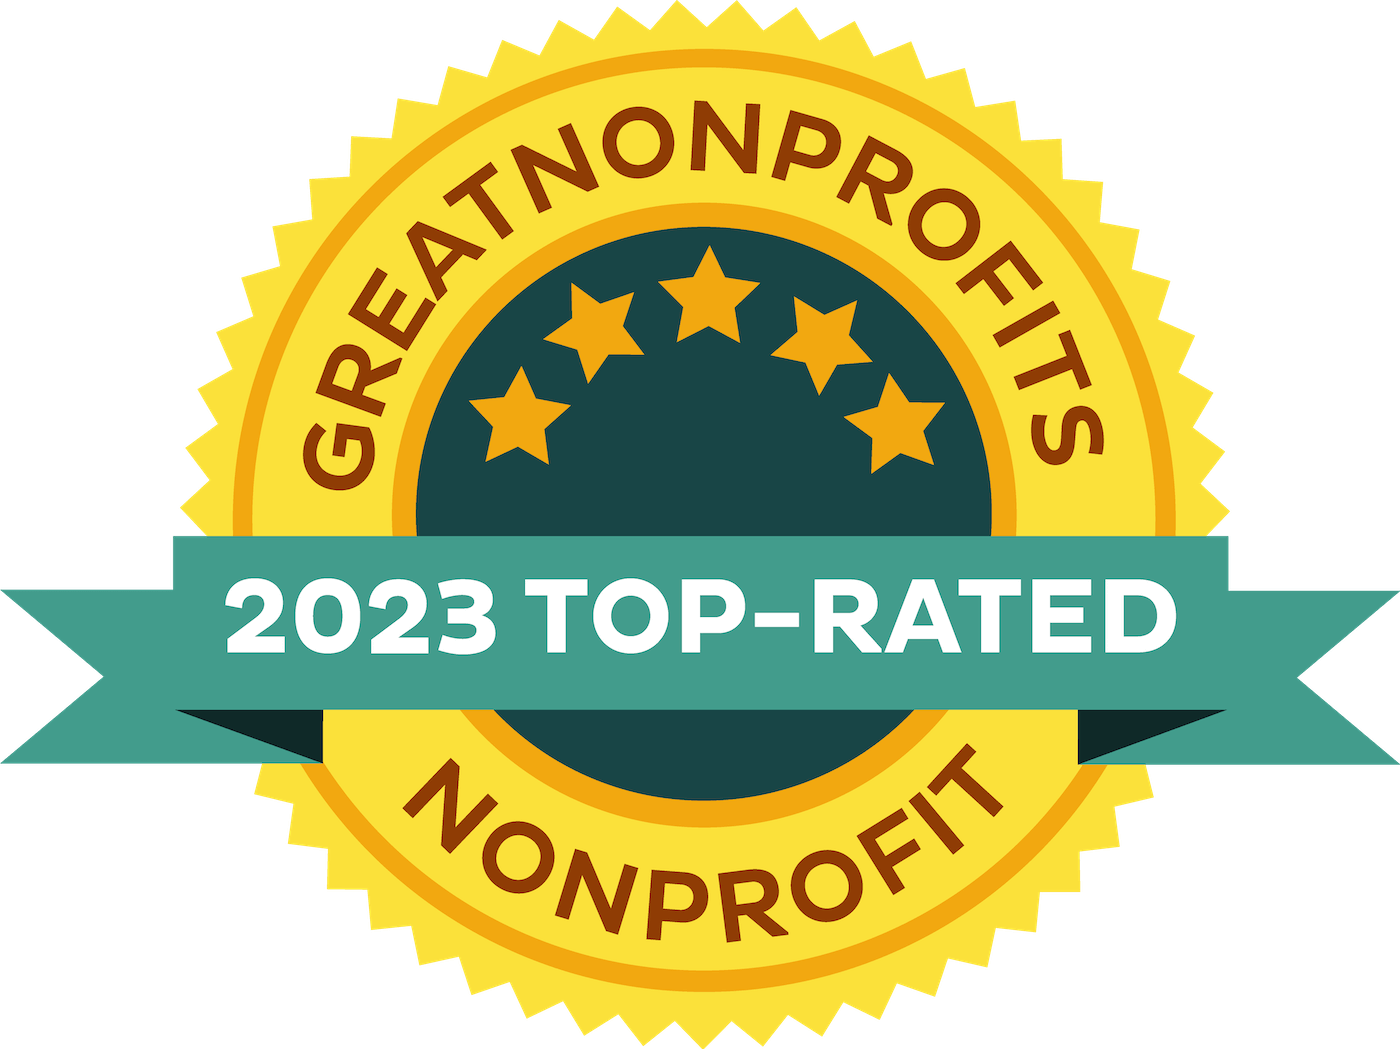 Embrace Relief Foundation named “Top-Rated Nonprofit” by Great Nonprofits